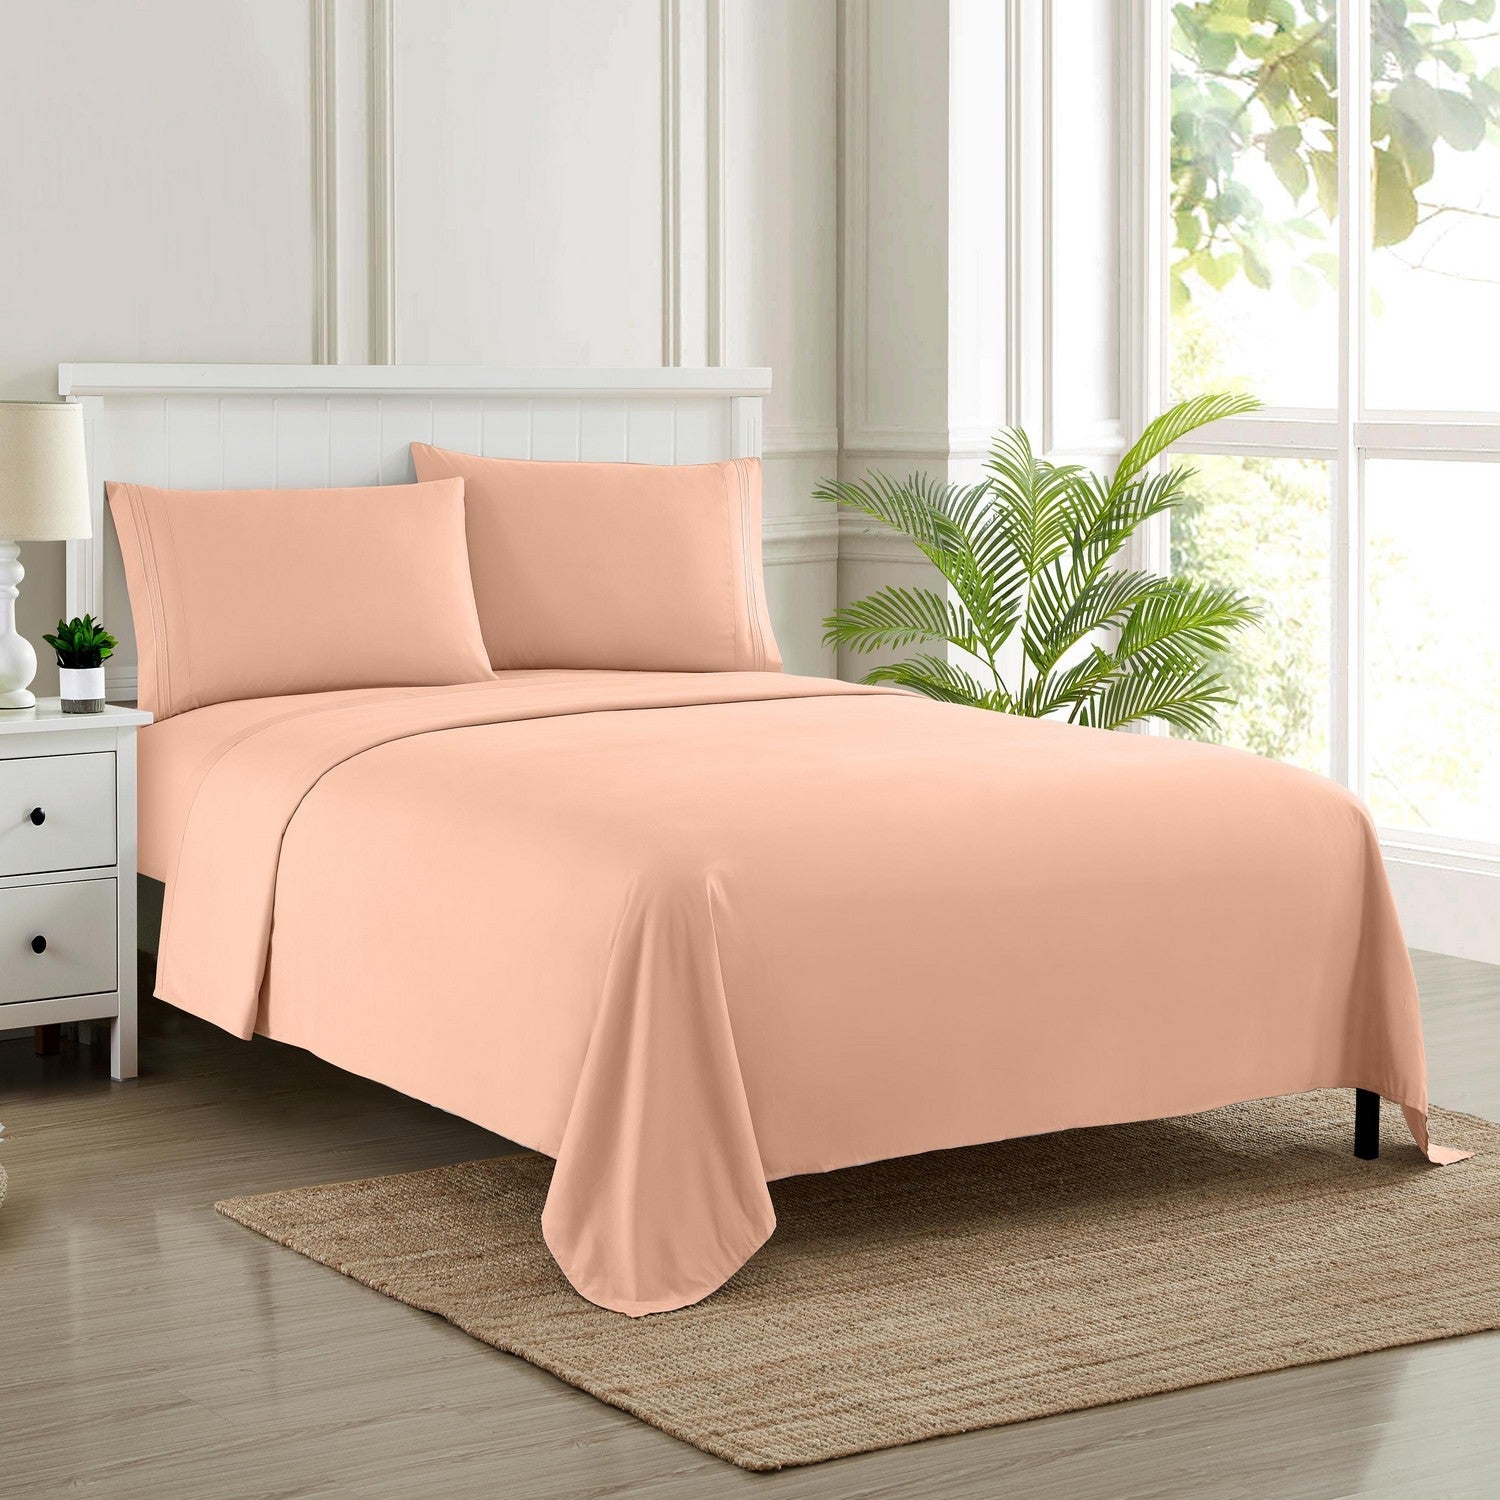 Classic 4-Piece Bed Sheet Set (Peach) - Bed